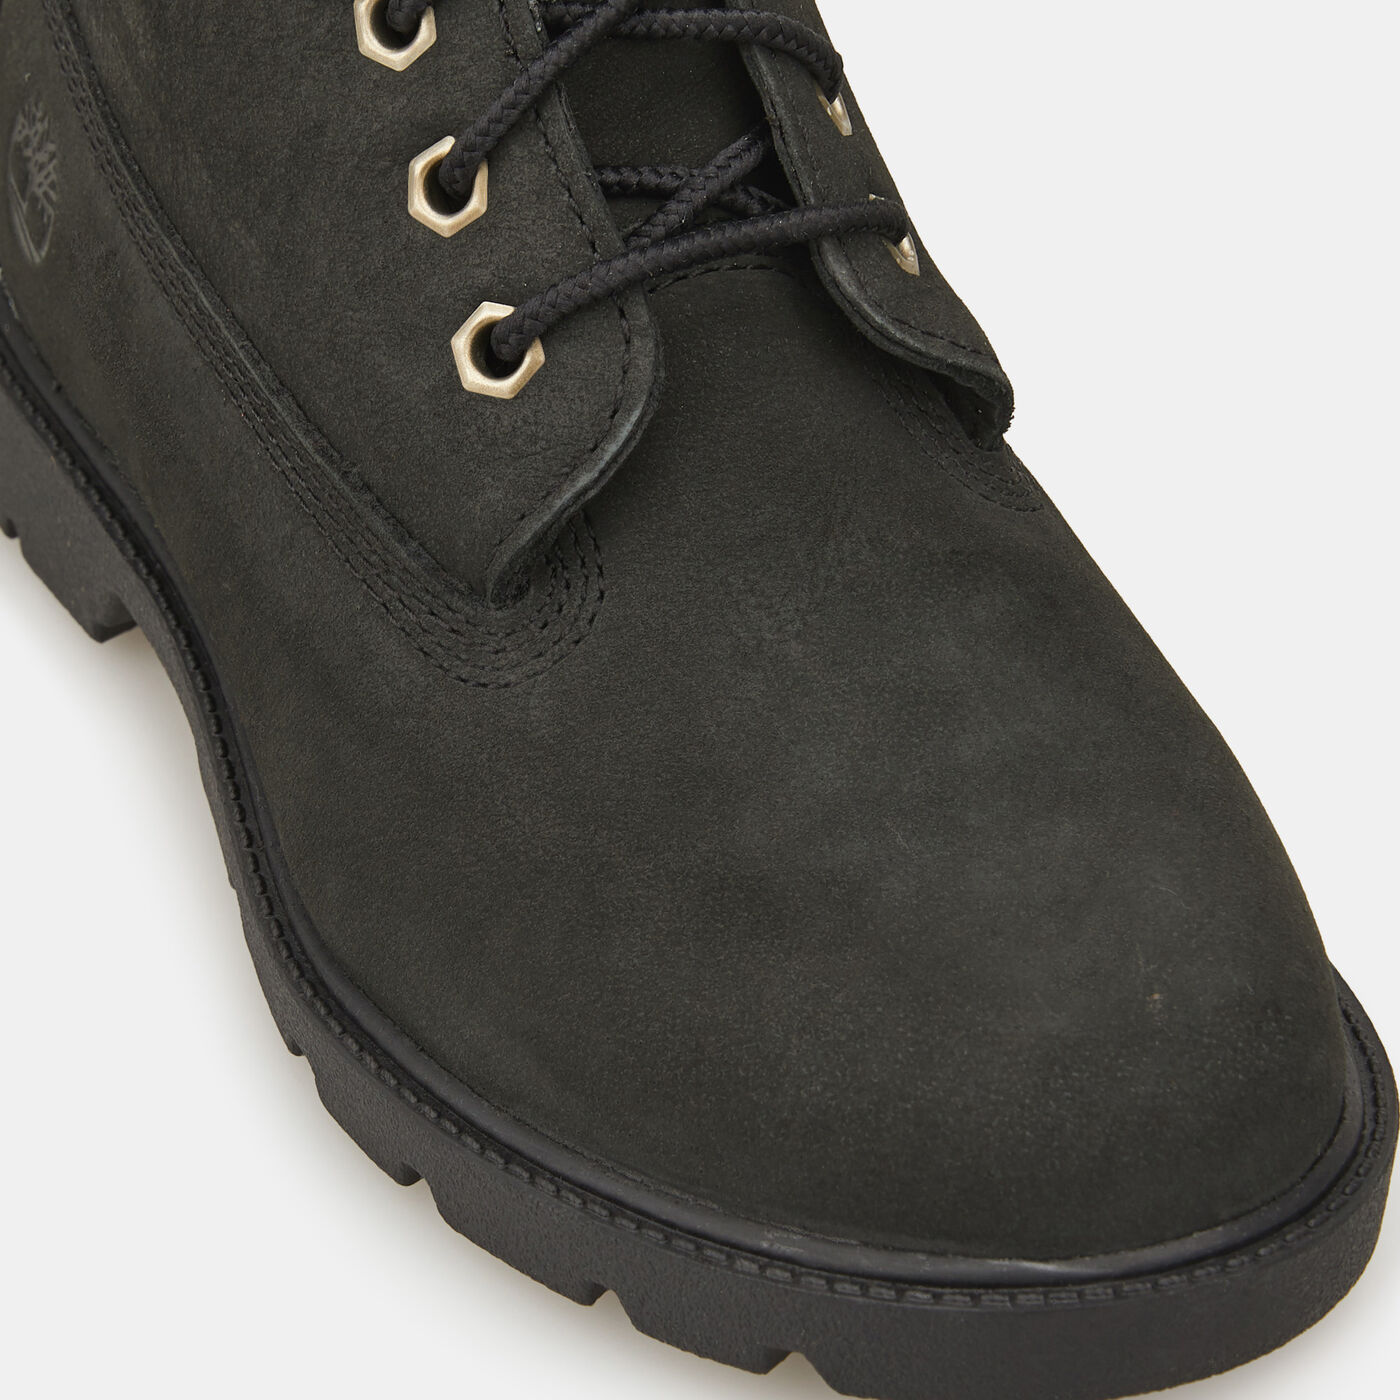 Kids’ 6-Inch Water-Resistant Basic Boot